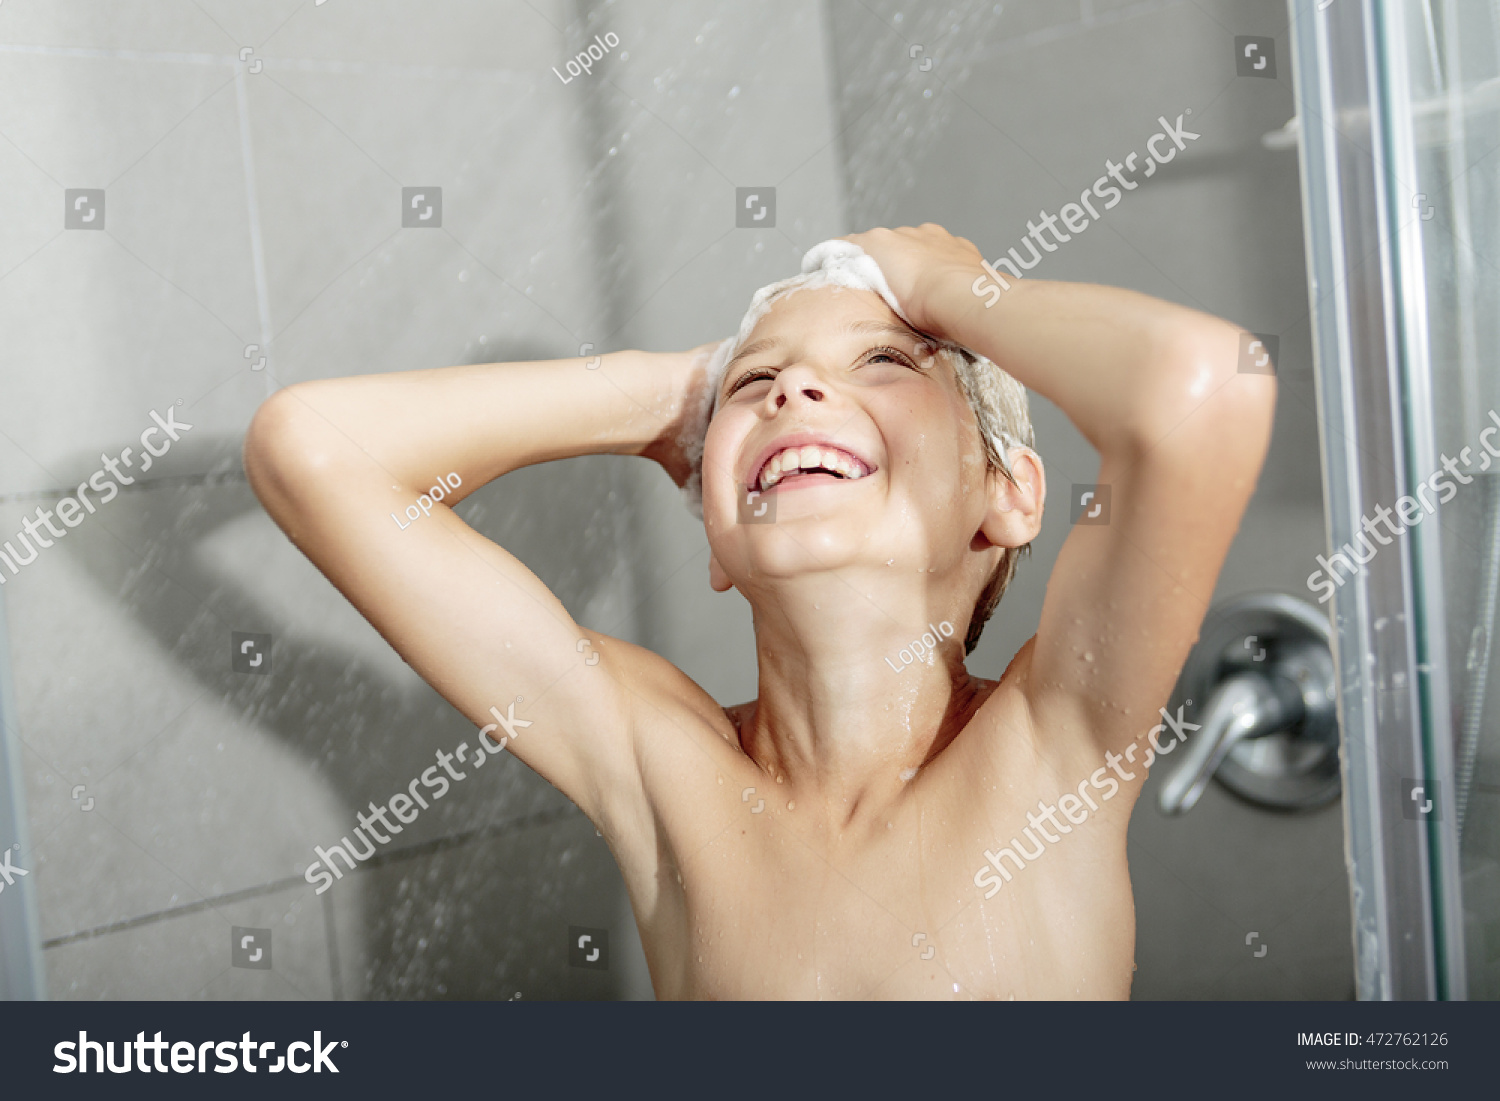 Boys And Girls Shower Together